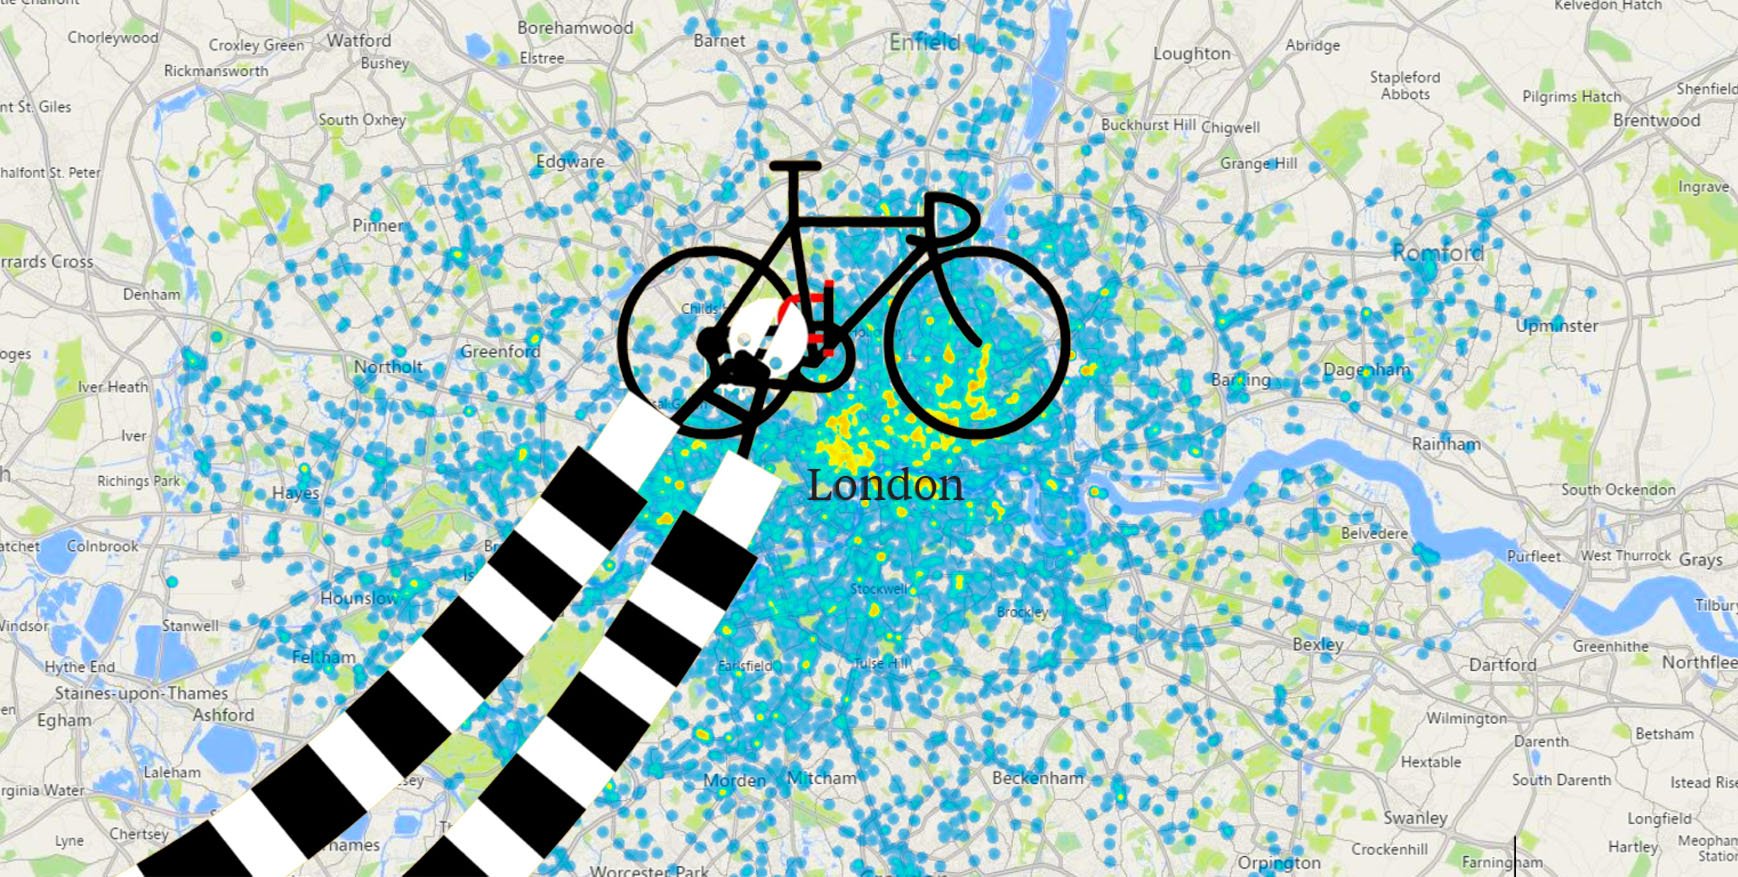 Bicycle thefts in London heatmap 2018